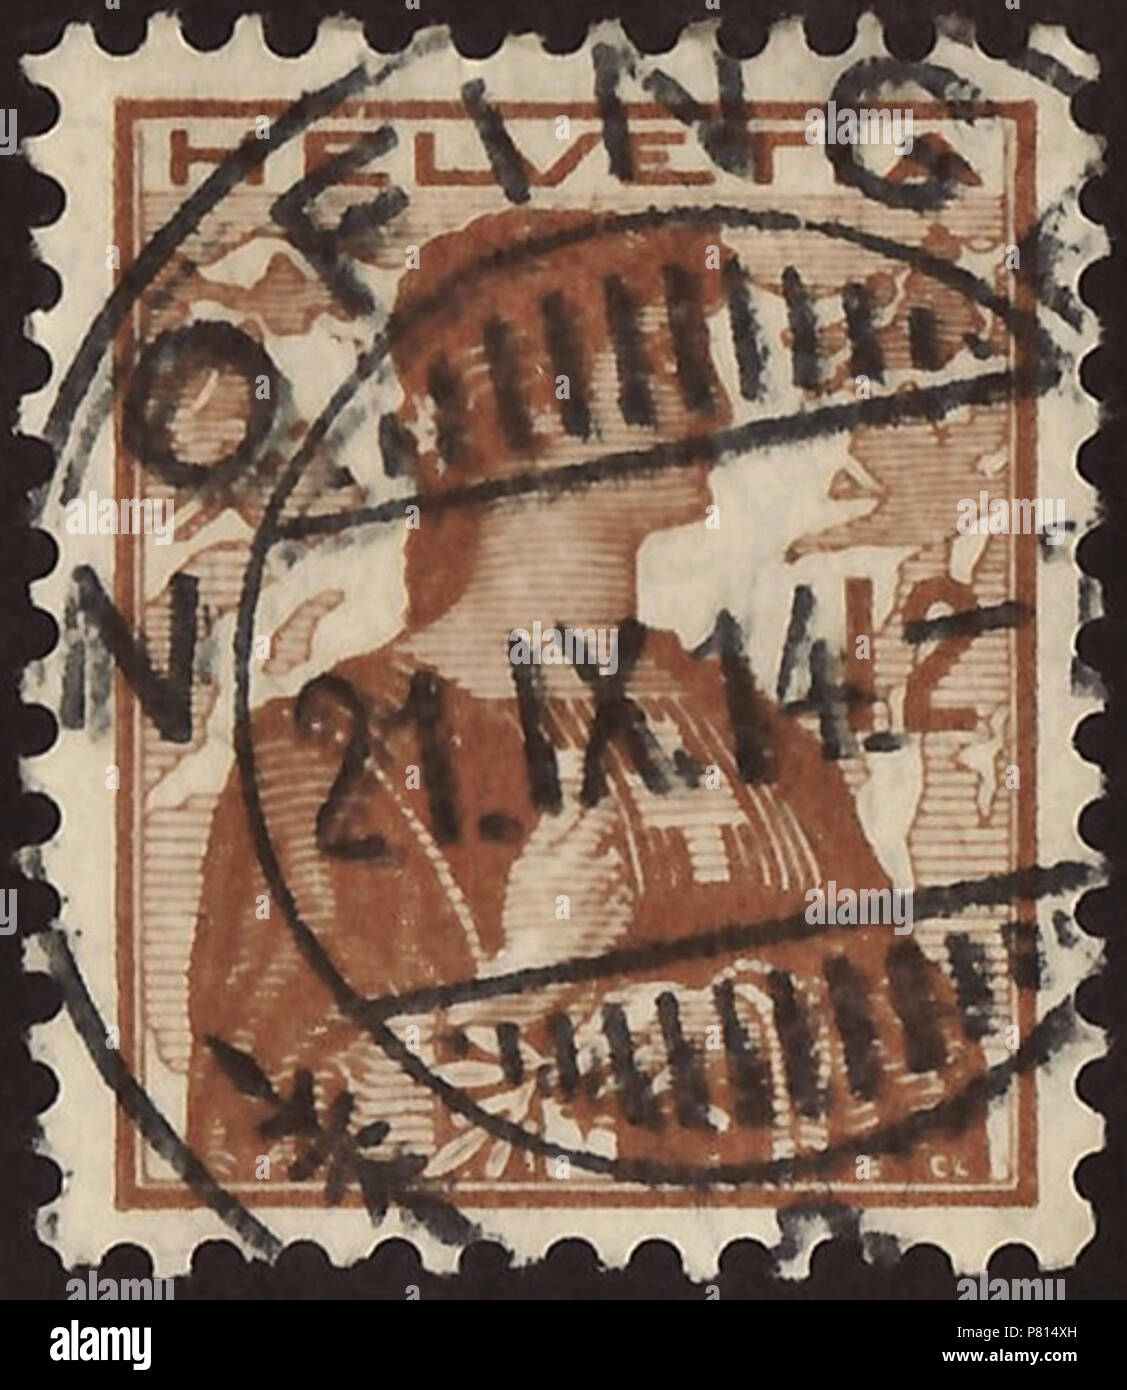 Stamp of Switzerland; 1909; definitive stamps of the issue 'Helvetia with bough before mountain landscape'; portrait of the 'Helvetia' with view to right and a bough in the left hand before snow-covered mountain landscape; value number central-right without frame; stamp postmarked in Zofingen, 1914 Stamp: Michel: No. 115; Yvert et Tellier: No. 132; AFA: No. 129 Color: orange brown to dark orange brown on normal paper Watermark: Switzerland No. 2 (multiple Swiss crosses without oval) Nominal value: 12 (Rappen, Centimes) Postage validity: from 1909 until 31 December 1932 Stamp picture size (prin Stock Photo